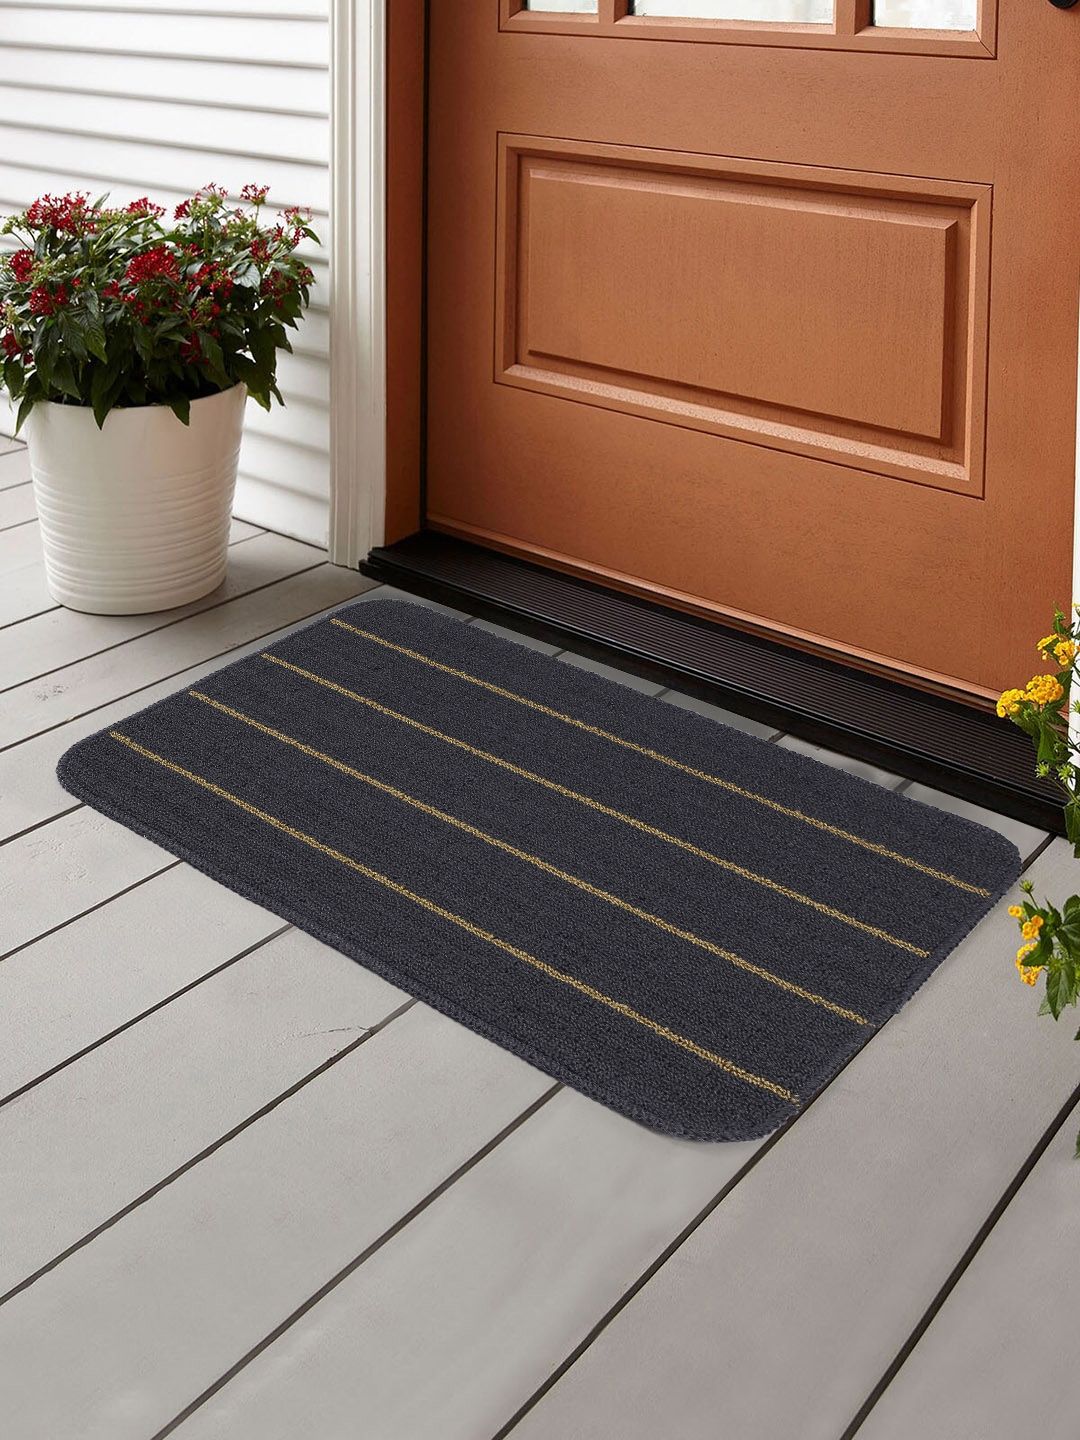 Saral Home Charcoal Grey & Mustard Yellow Striped Polypropylene Anti-Skid Doormat Price in India